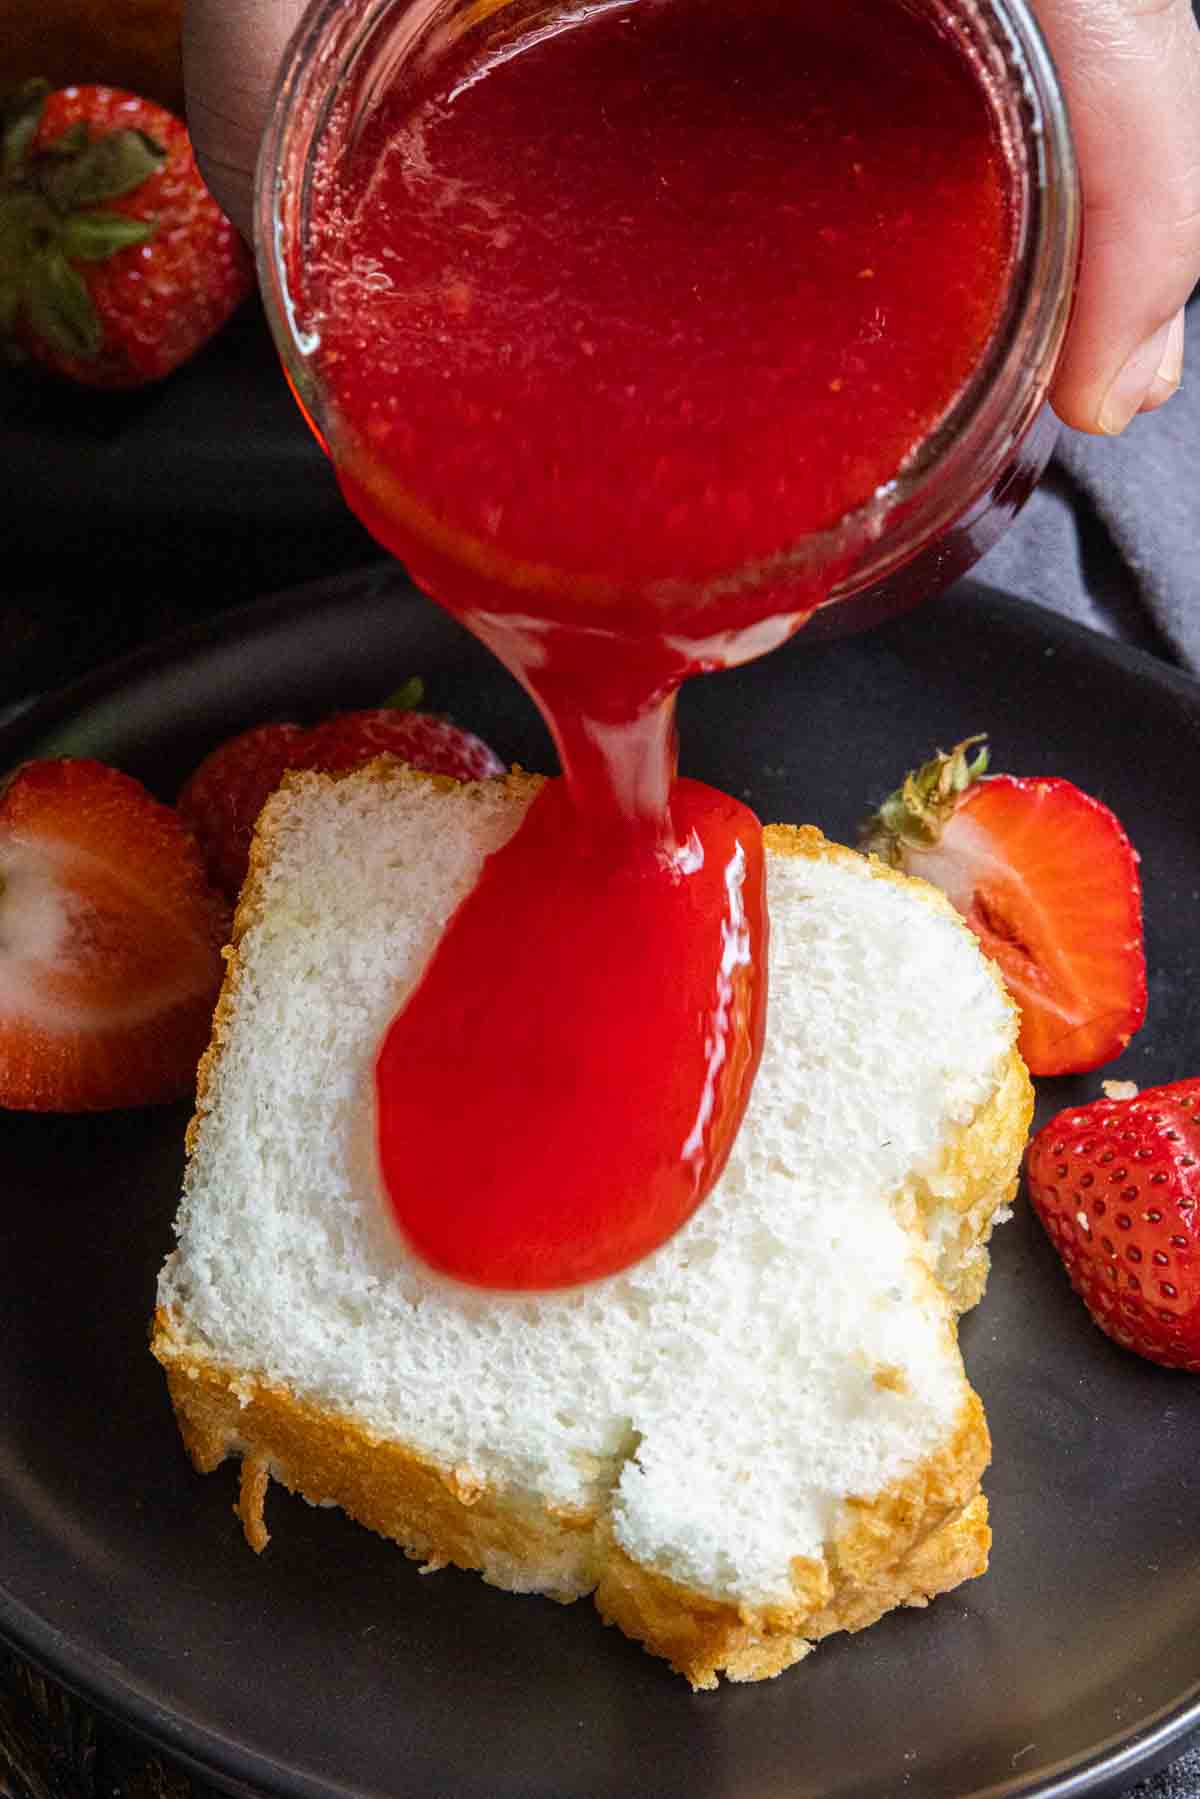 pouring Strawberry Coulis on cake